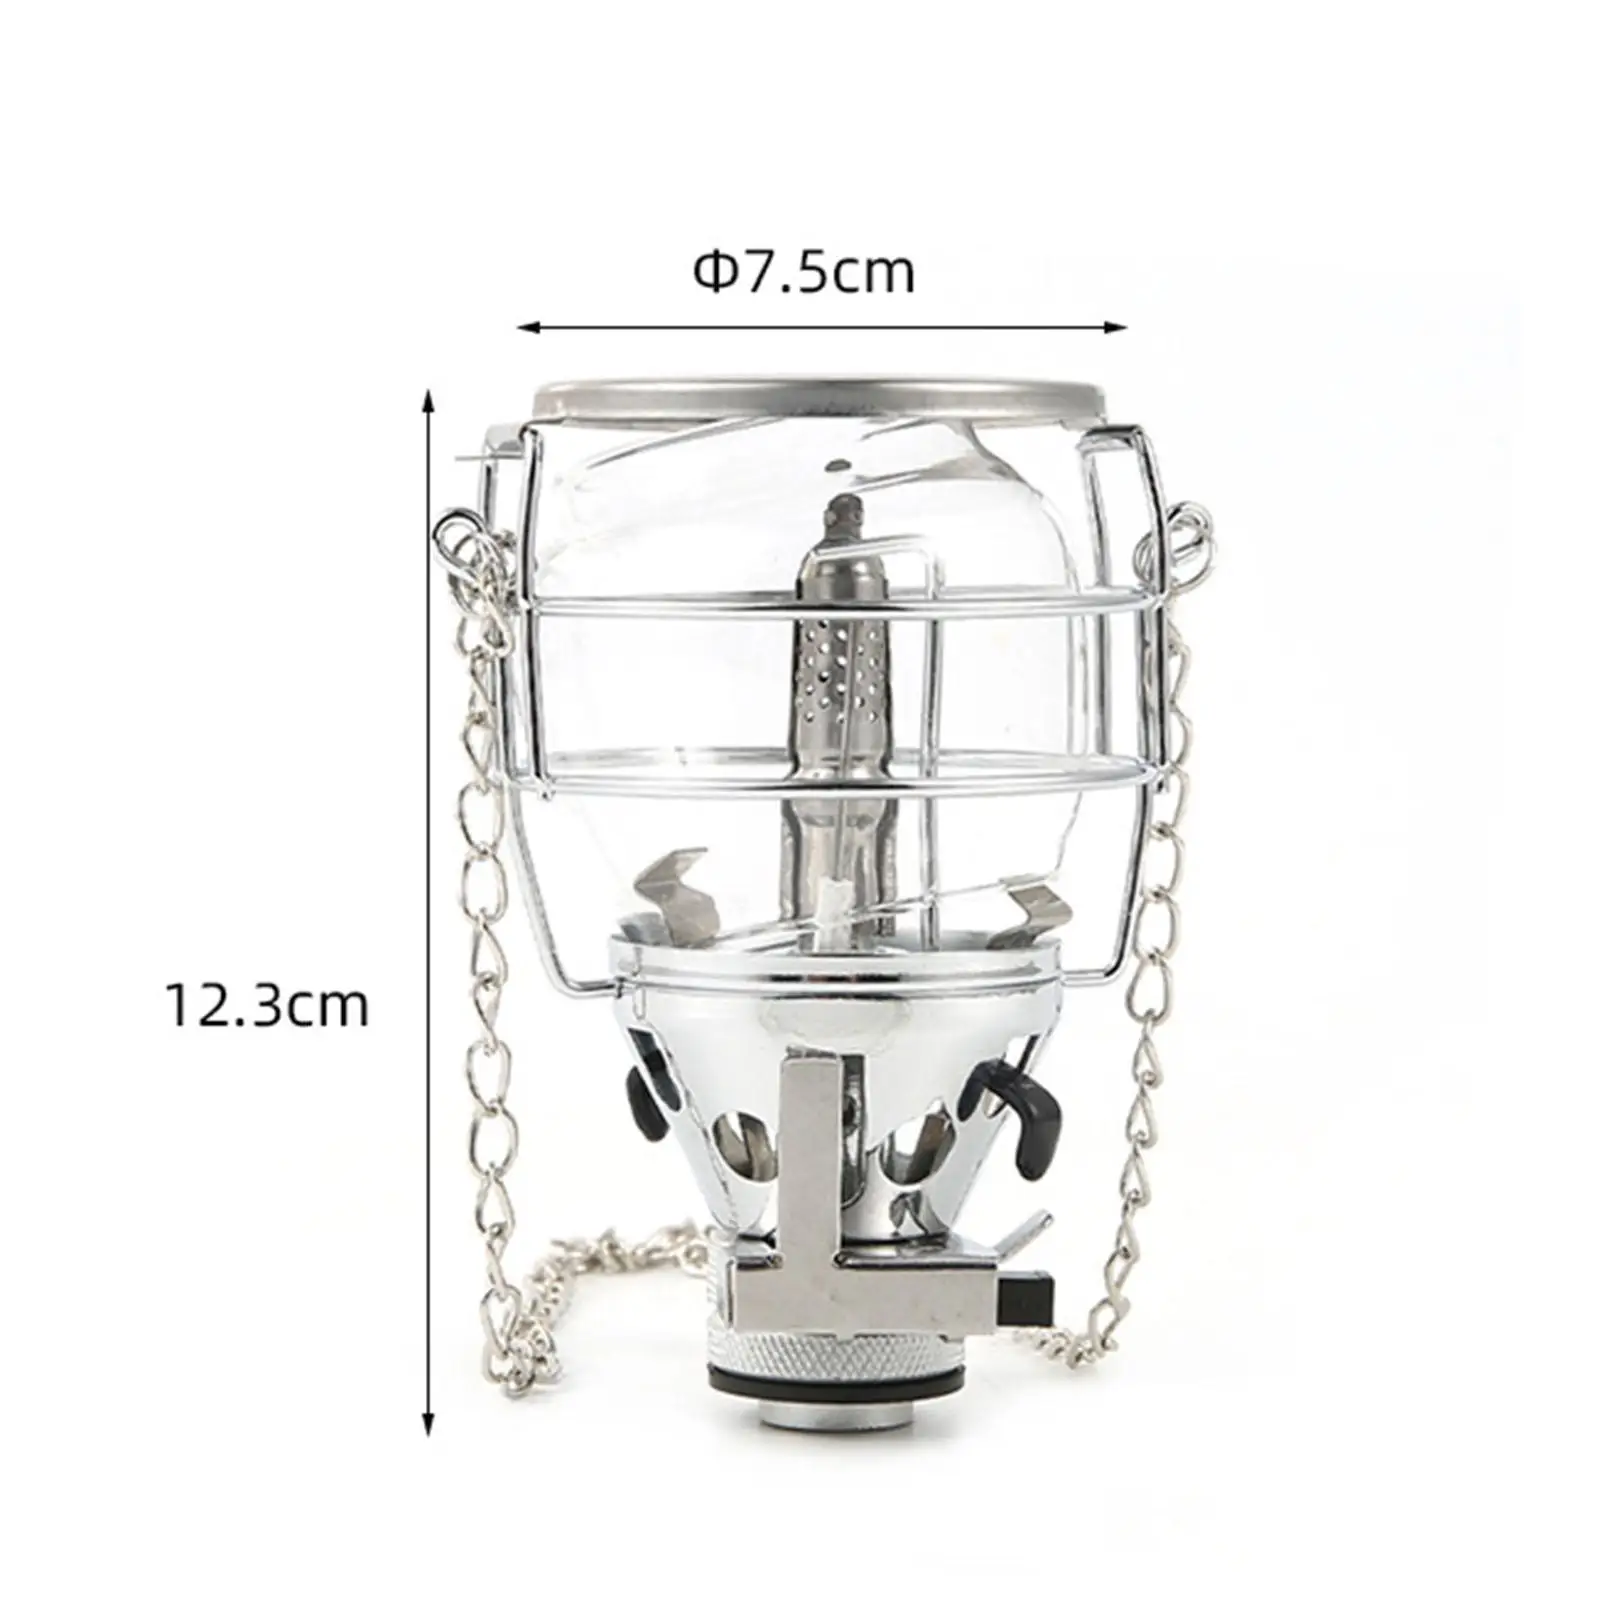 Portable Gas Lantern Fuel Lamp Adjustable with Carry Case Tent Lantern for Trekking Hiking Climbing Emergency Fishing